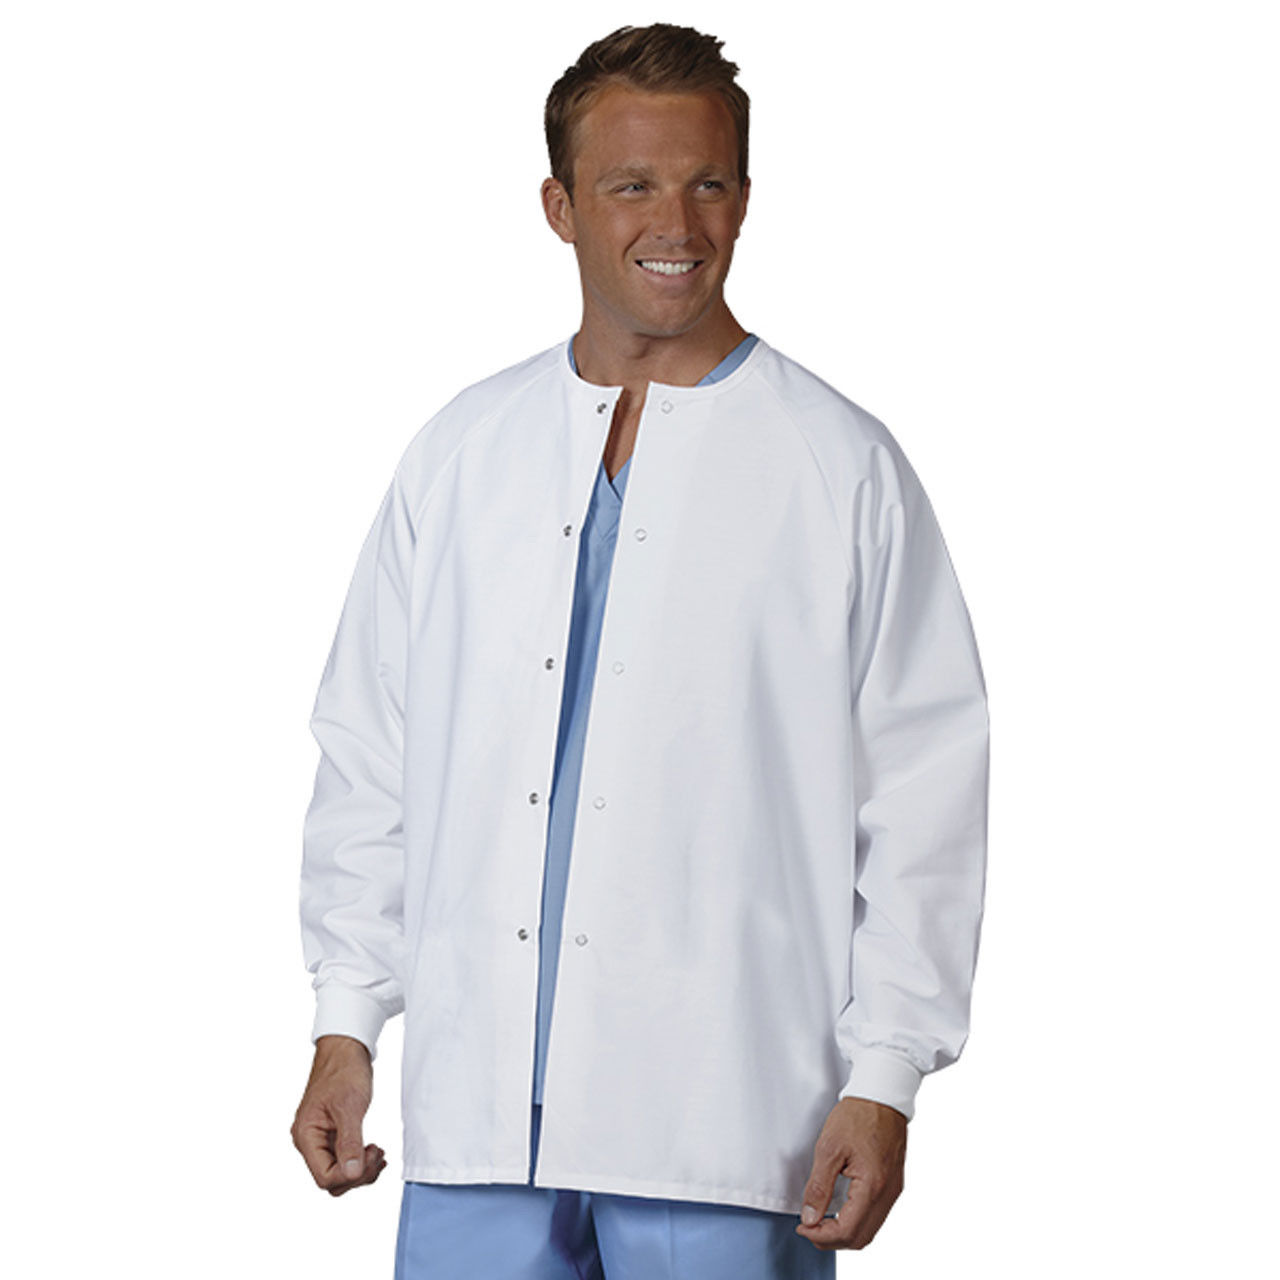 Wholesale Scrub Warm Up Jacket in White, Unisex, Bulk of 48 Questions & Answers